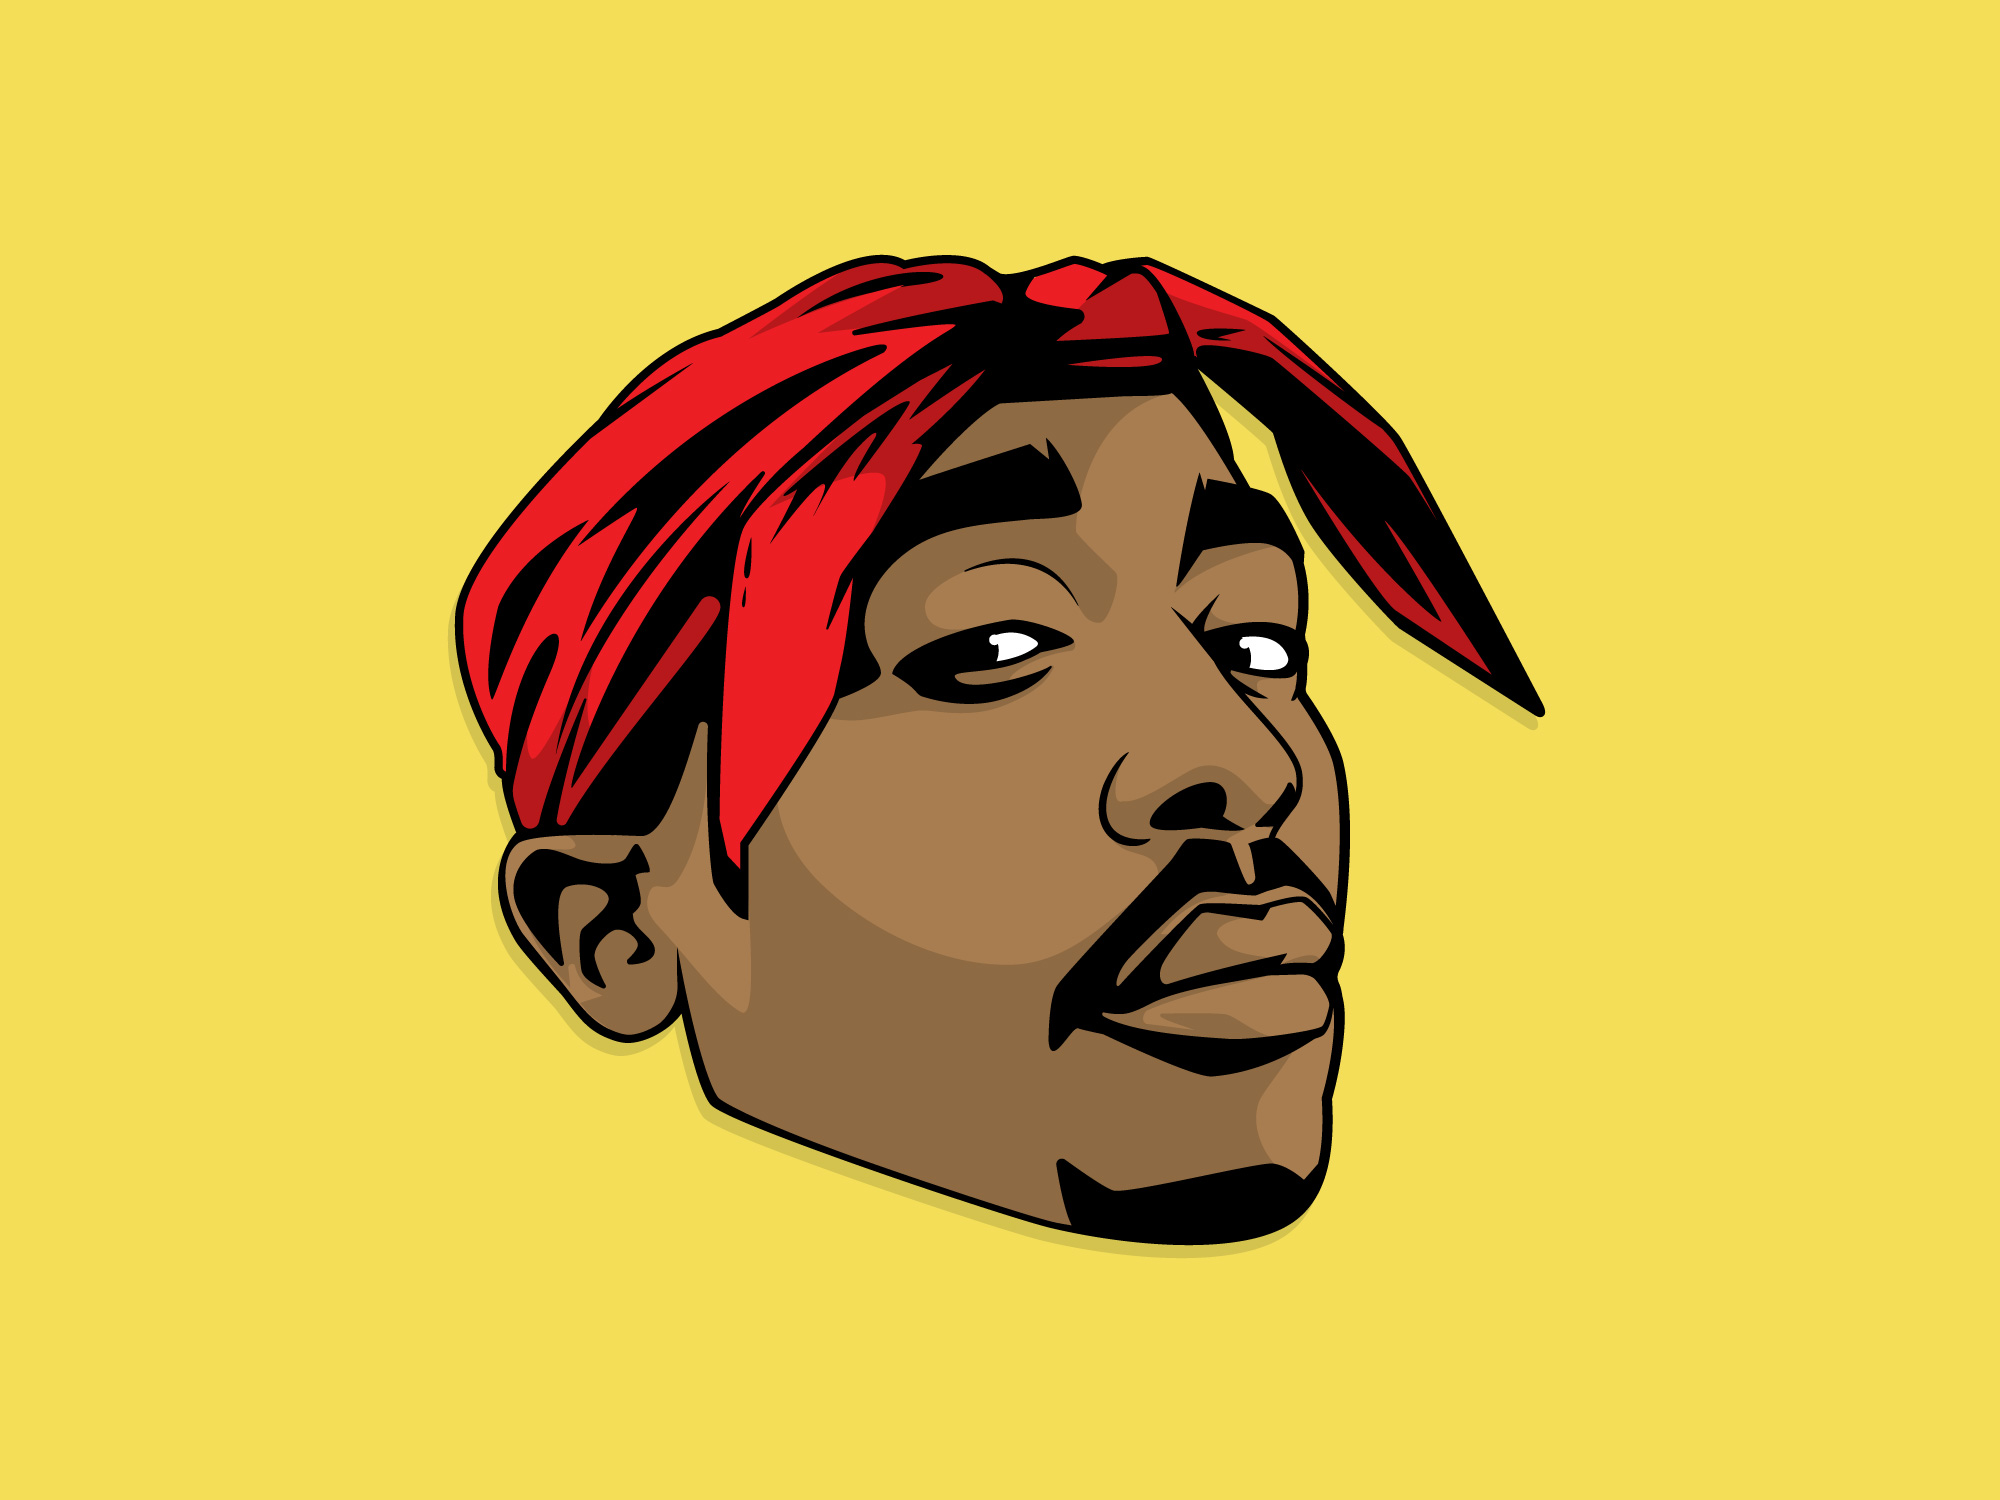 2pac-vector-head-design-by-old-dirty-dermot-bk-creative-for-hire